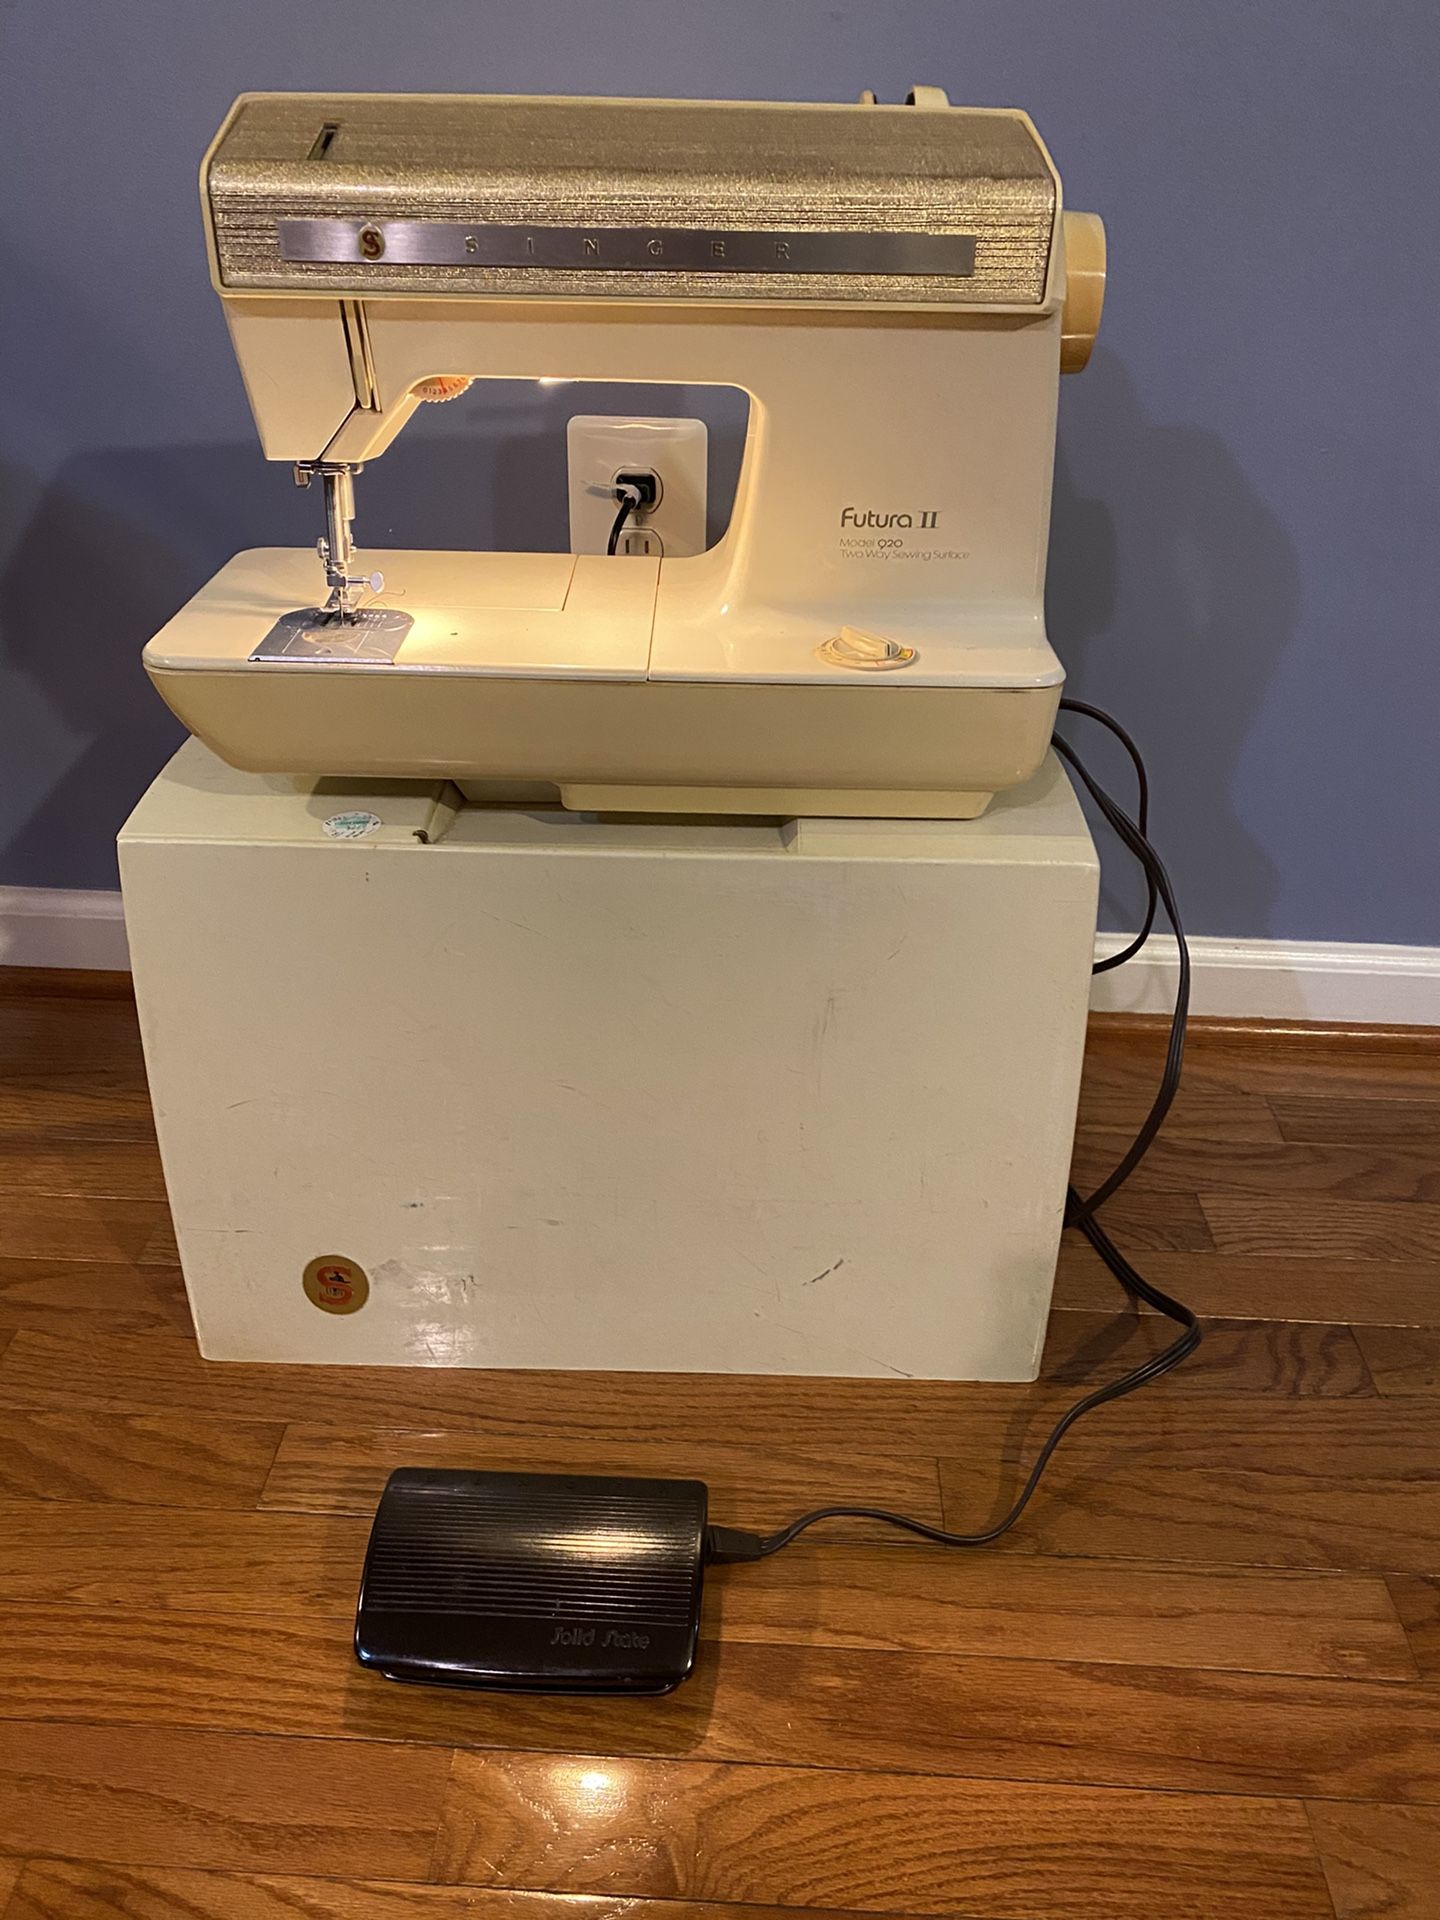 Sewing machine(Singer Futura 11, model 920 collectible sewing machine in flawlessly condition)